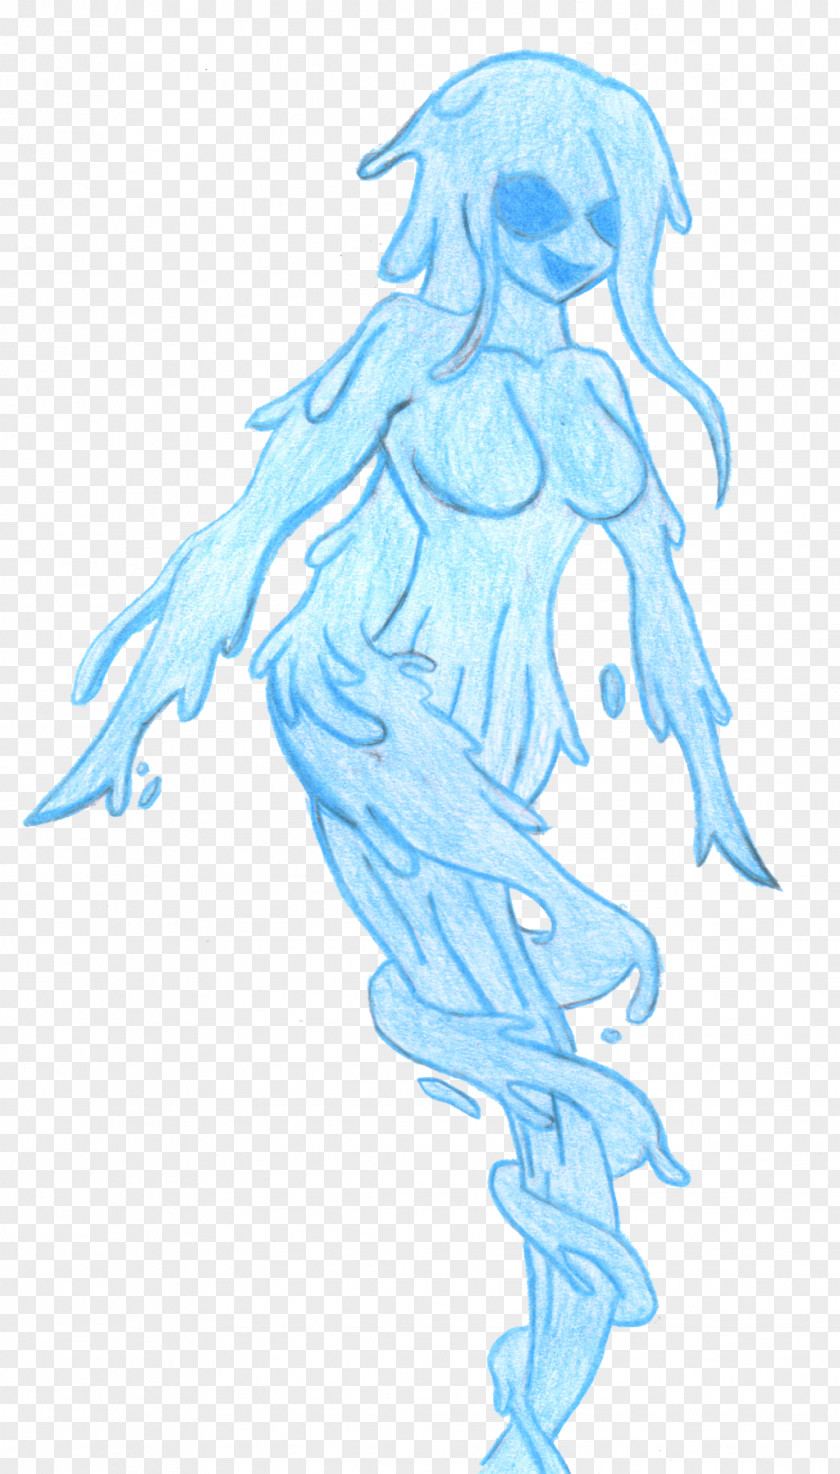 Water Whirlpool SCP Foundation Creepypasta Drawing Sketch PNG